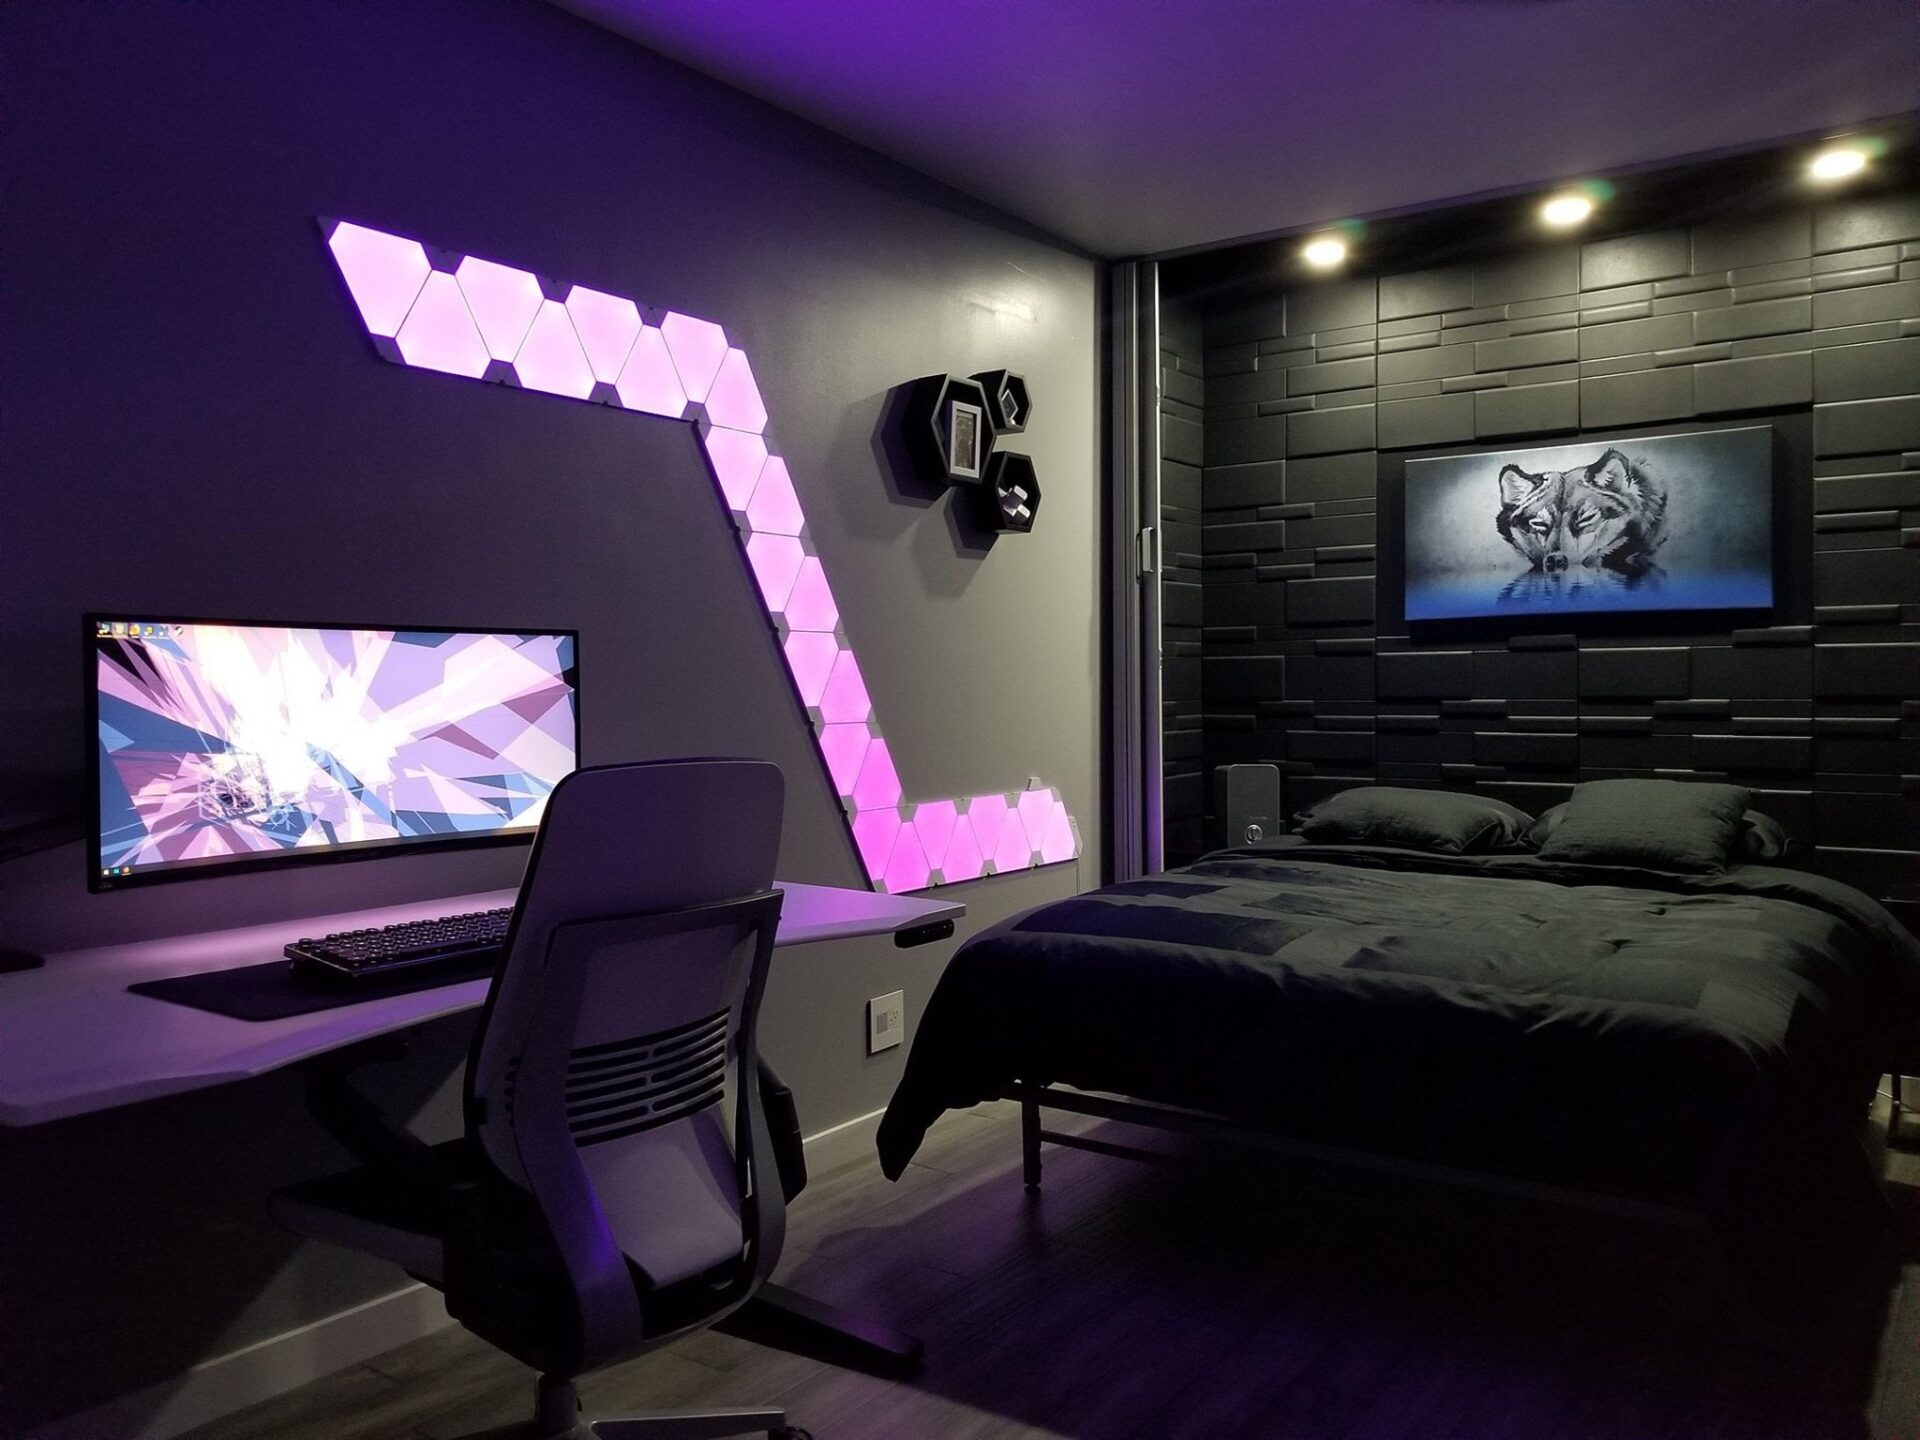 How To Make The Perfect Gaming Setup: Gaming Room Inspirations